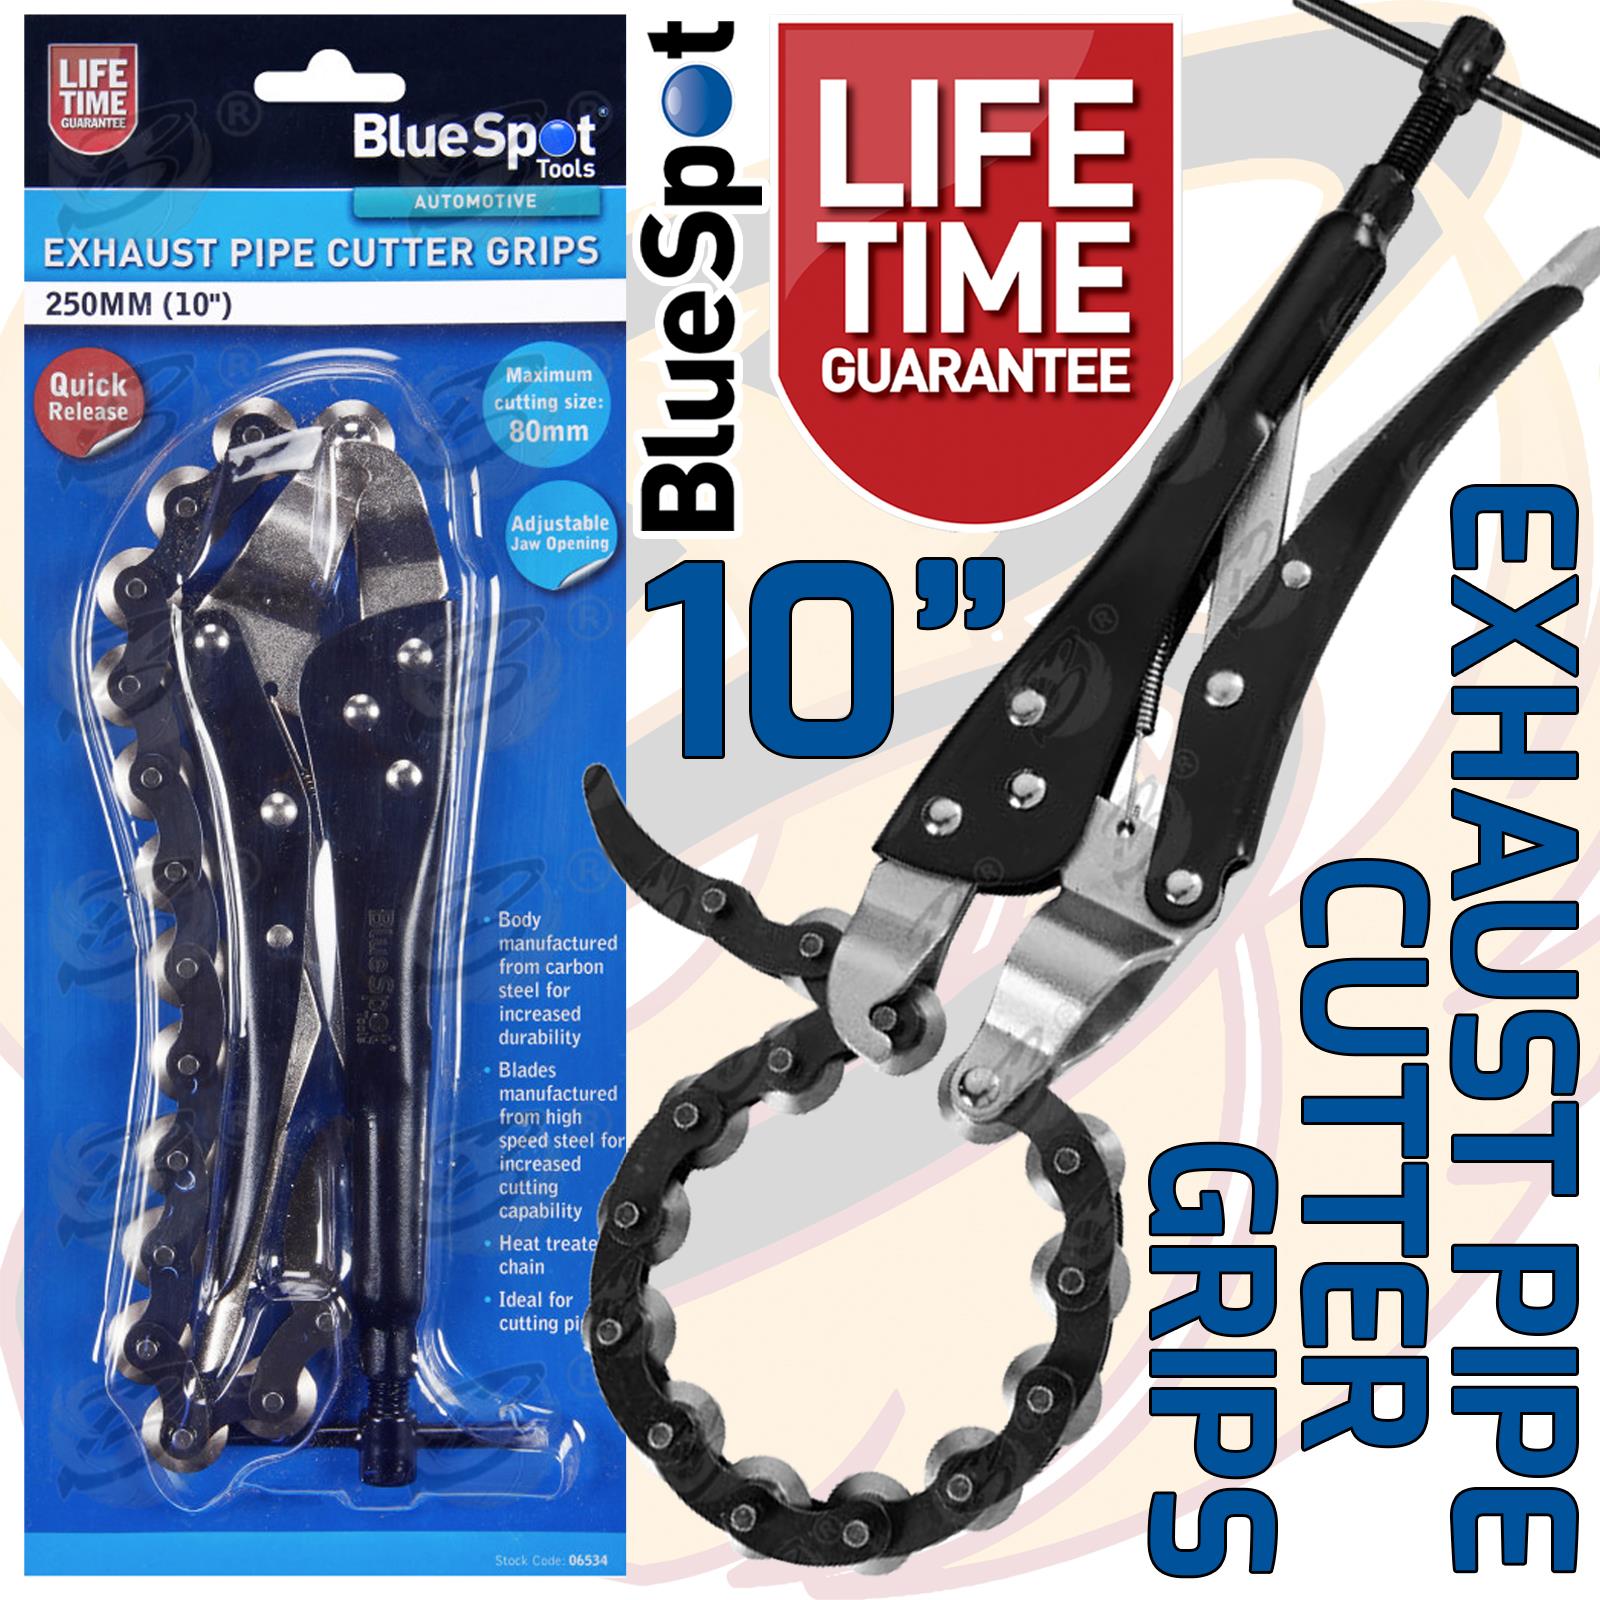 BLUESPOT 10" EXHAUST PIPE CUTTING PLIERS